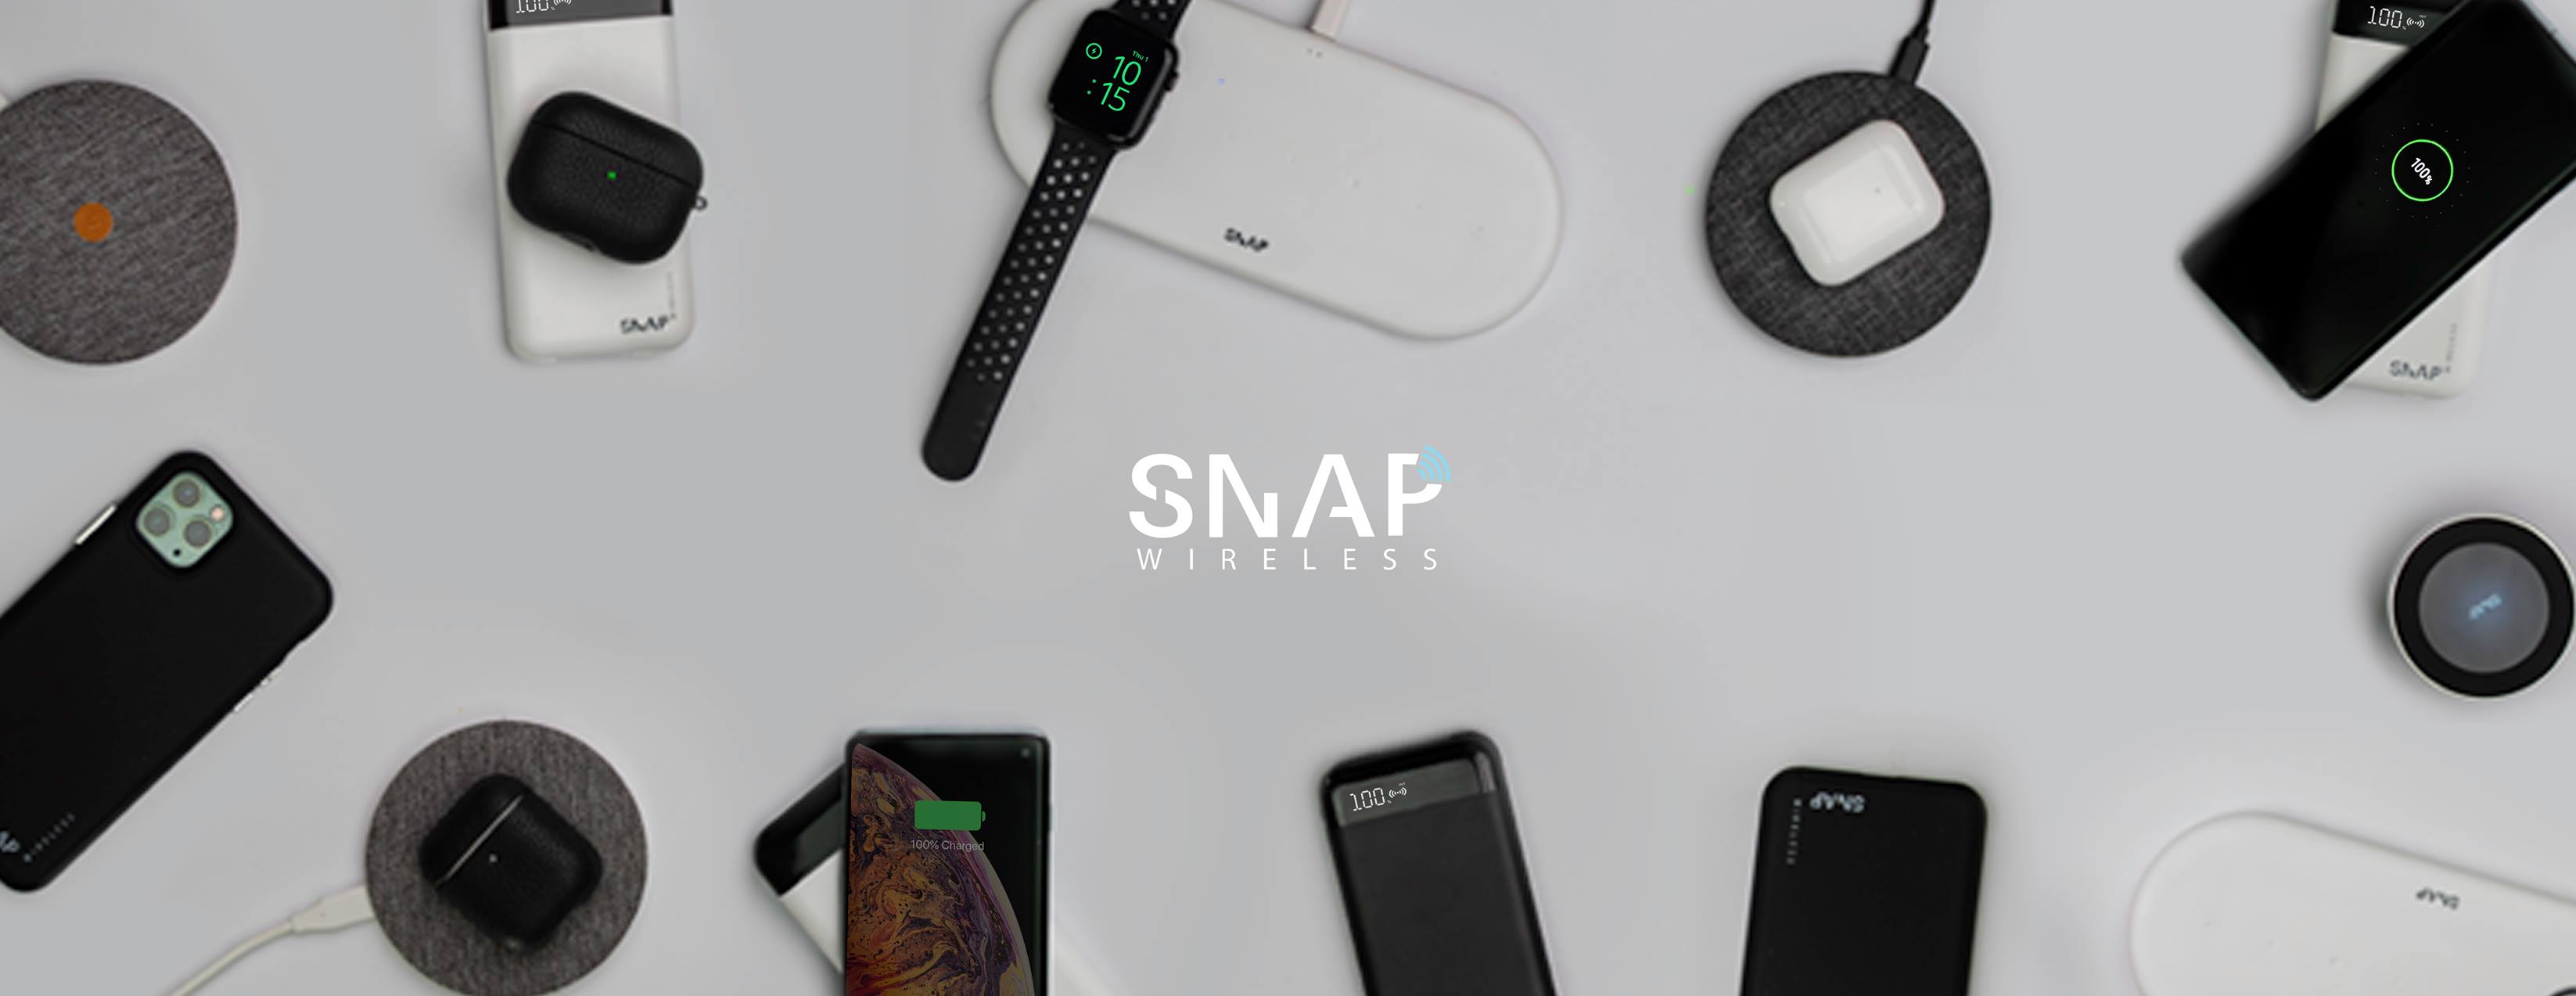 Shh, SnapWireless extra 15% OFF on your order with discount code